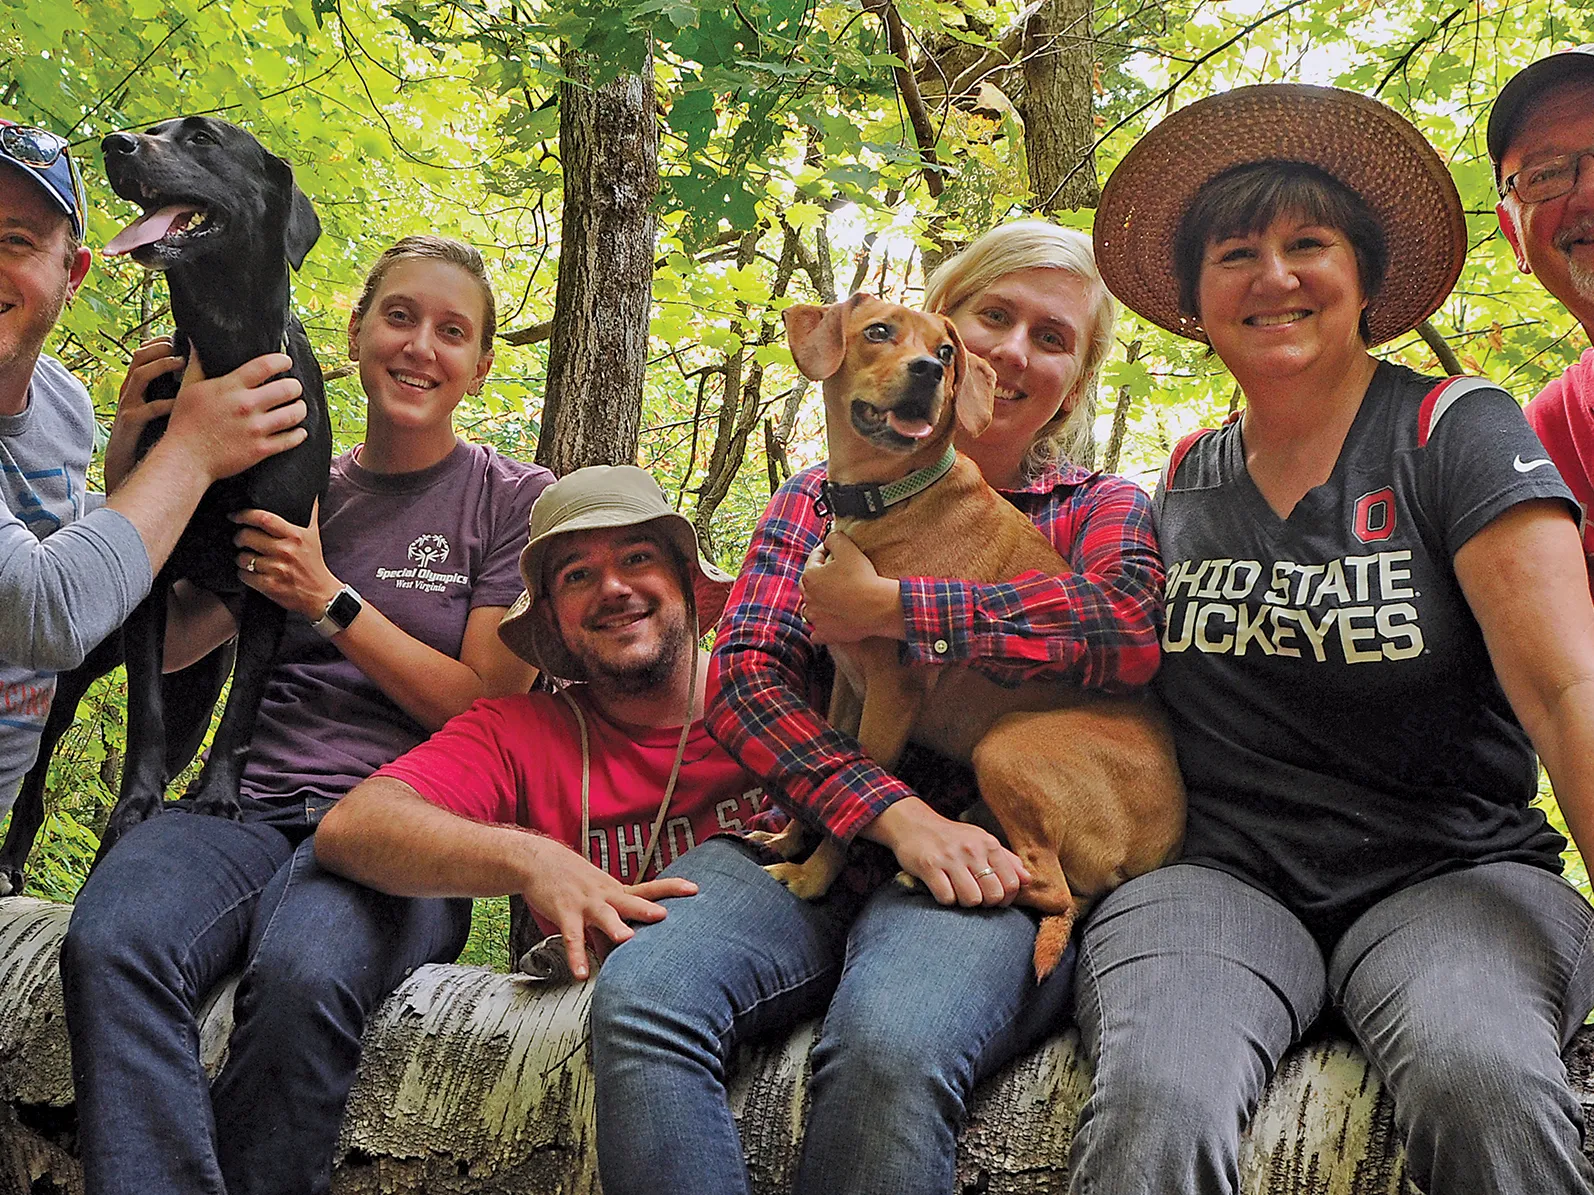 Sitting on a low wall on a hiking trail in the woods, Mary Alice Casey and her family pose with their pets. Both of her grown children and their spouses brought their dogs for their hike, and her husband, an alumnus, wears an Ohio State T-shirt. The whole family looks like they’re enjoying themselves.